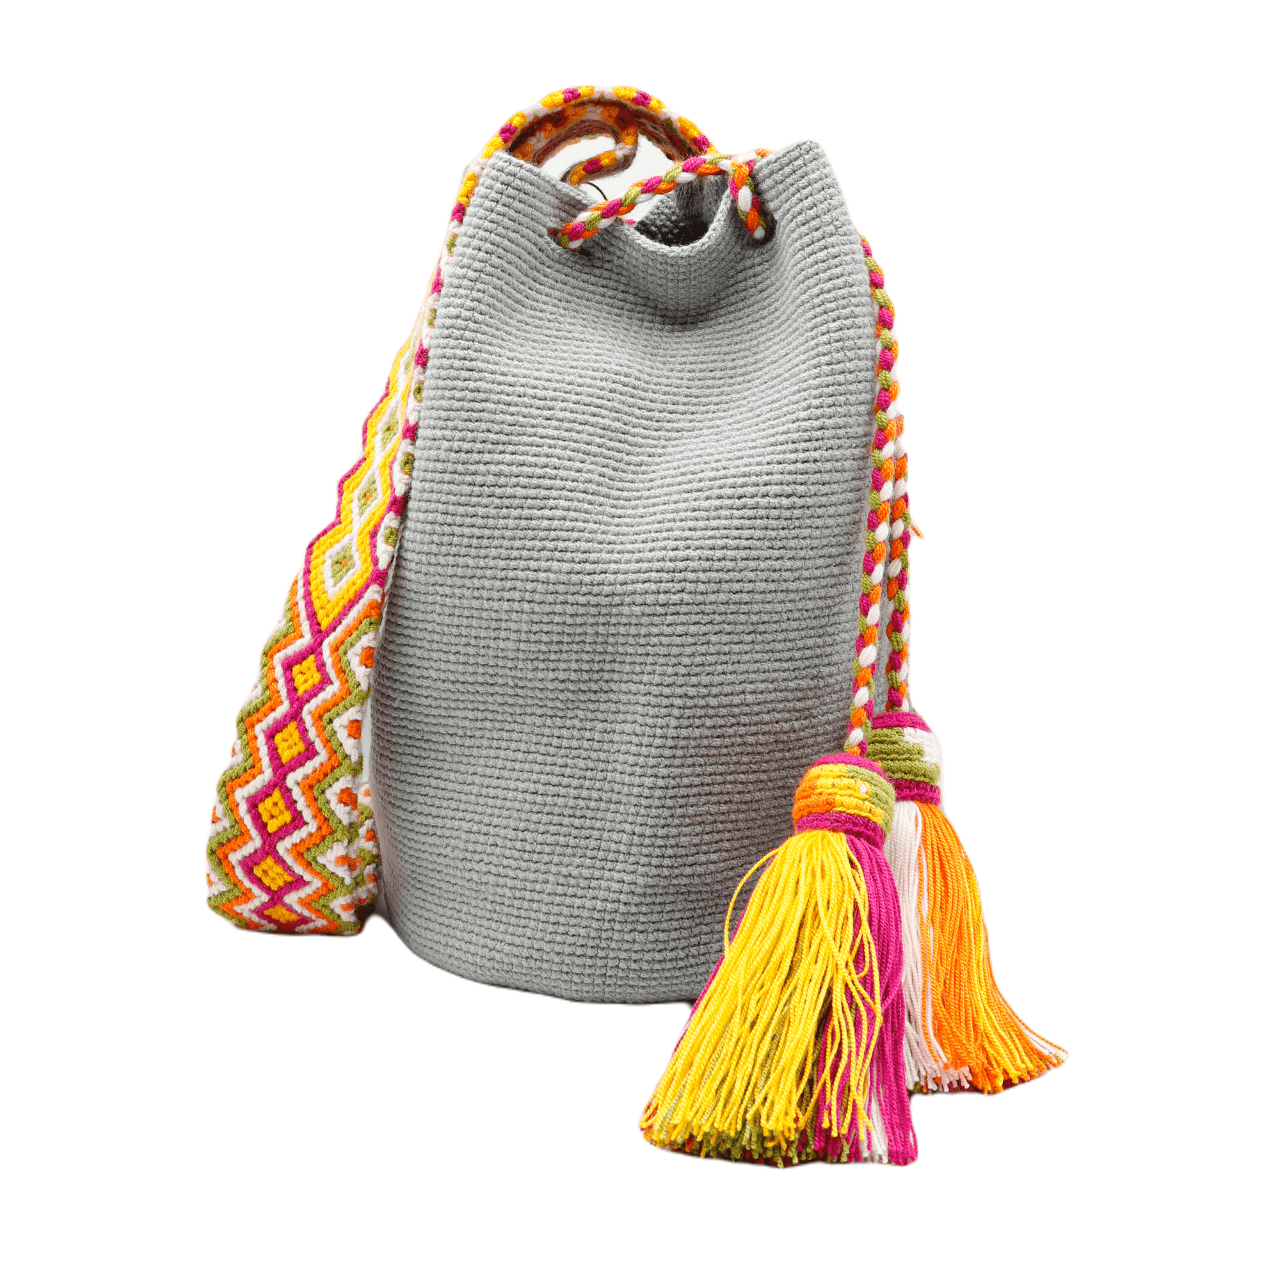 Harriet Wayuu bag in fog shade with a vibrant macrame shoulder strap, a fashionable and colorful addition to your outfit.